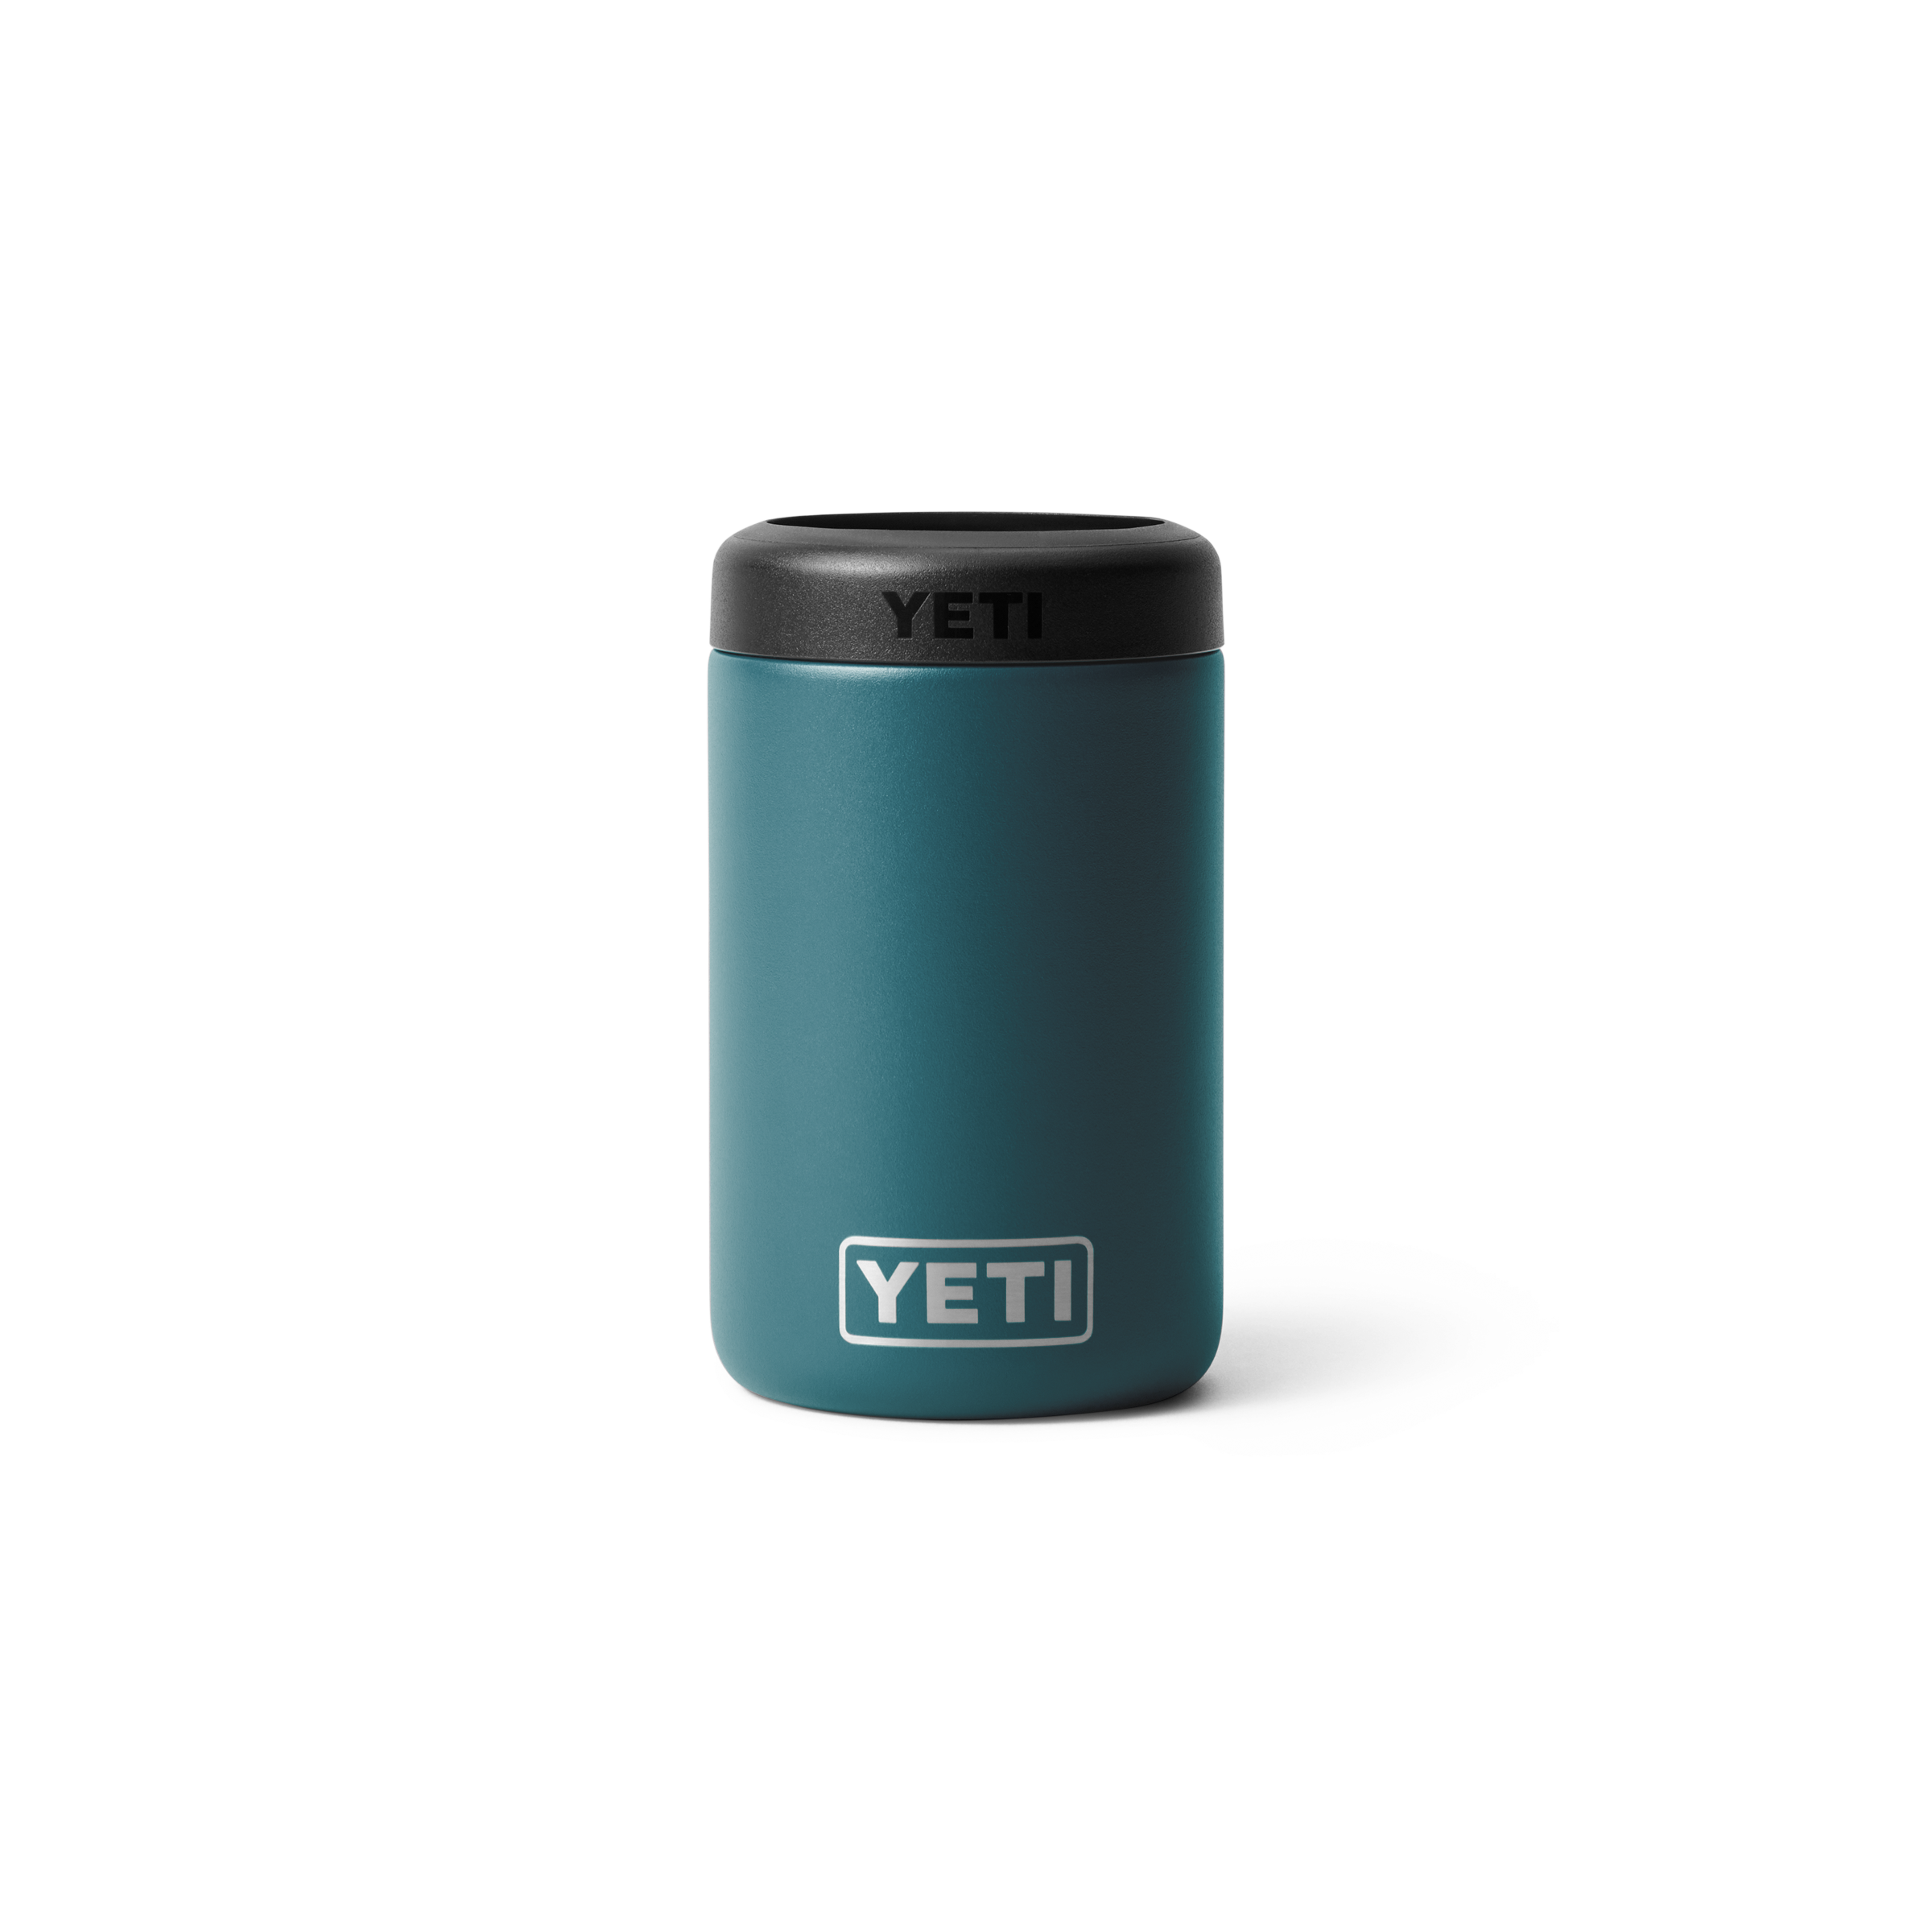 Yeti Australian Colster 375ml Can Insulator - AGAVE TEAL - Mansfield Hunting & Fishing - Products to prepare for Corona Virus